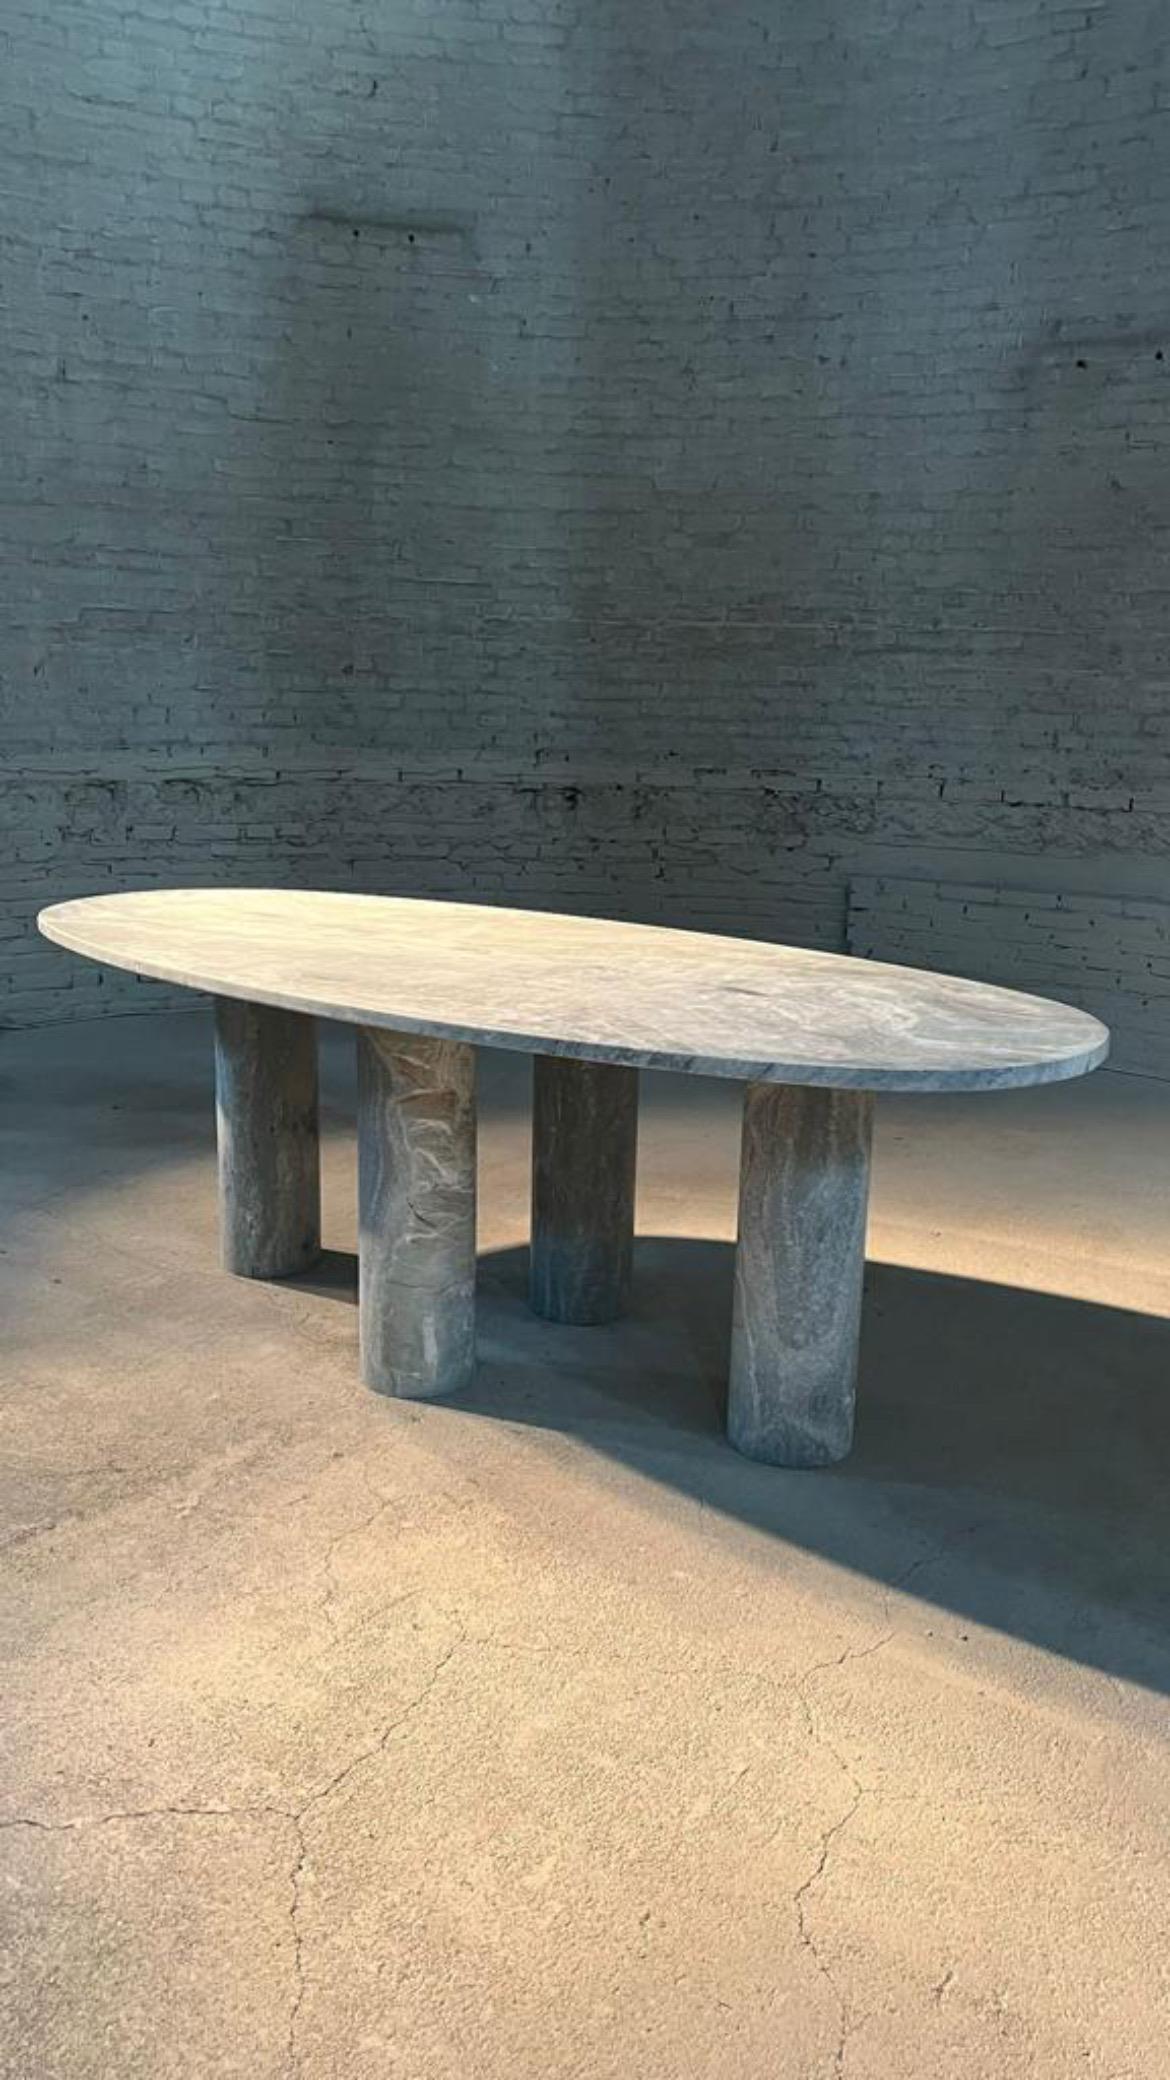 This minimalist table is made from one material, featuring an oval horse track top in green marble with white veining that elegantly sits on four cylindrical columns. 

Drawing inspiration from the vintage pieces of Mario Bellini, the column legs